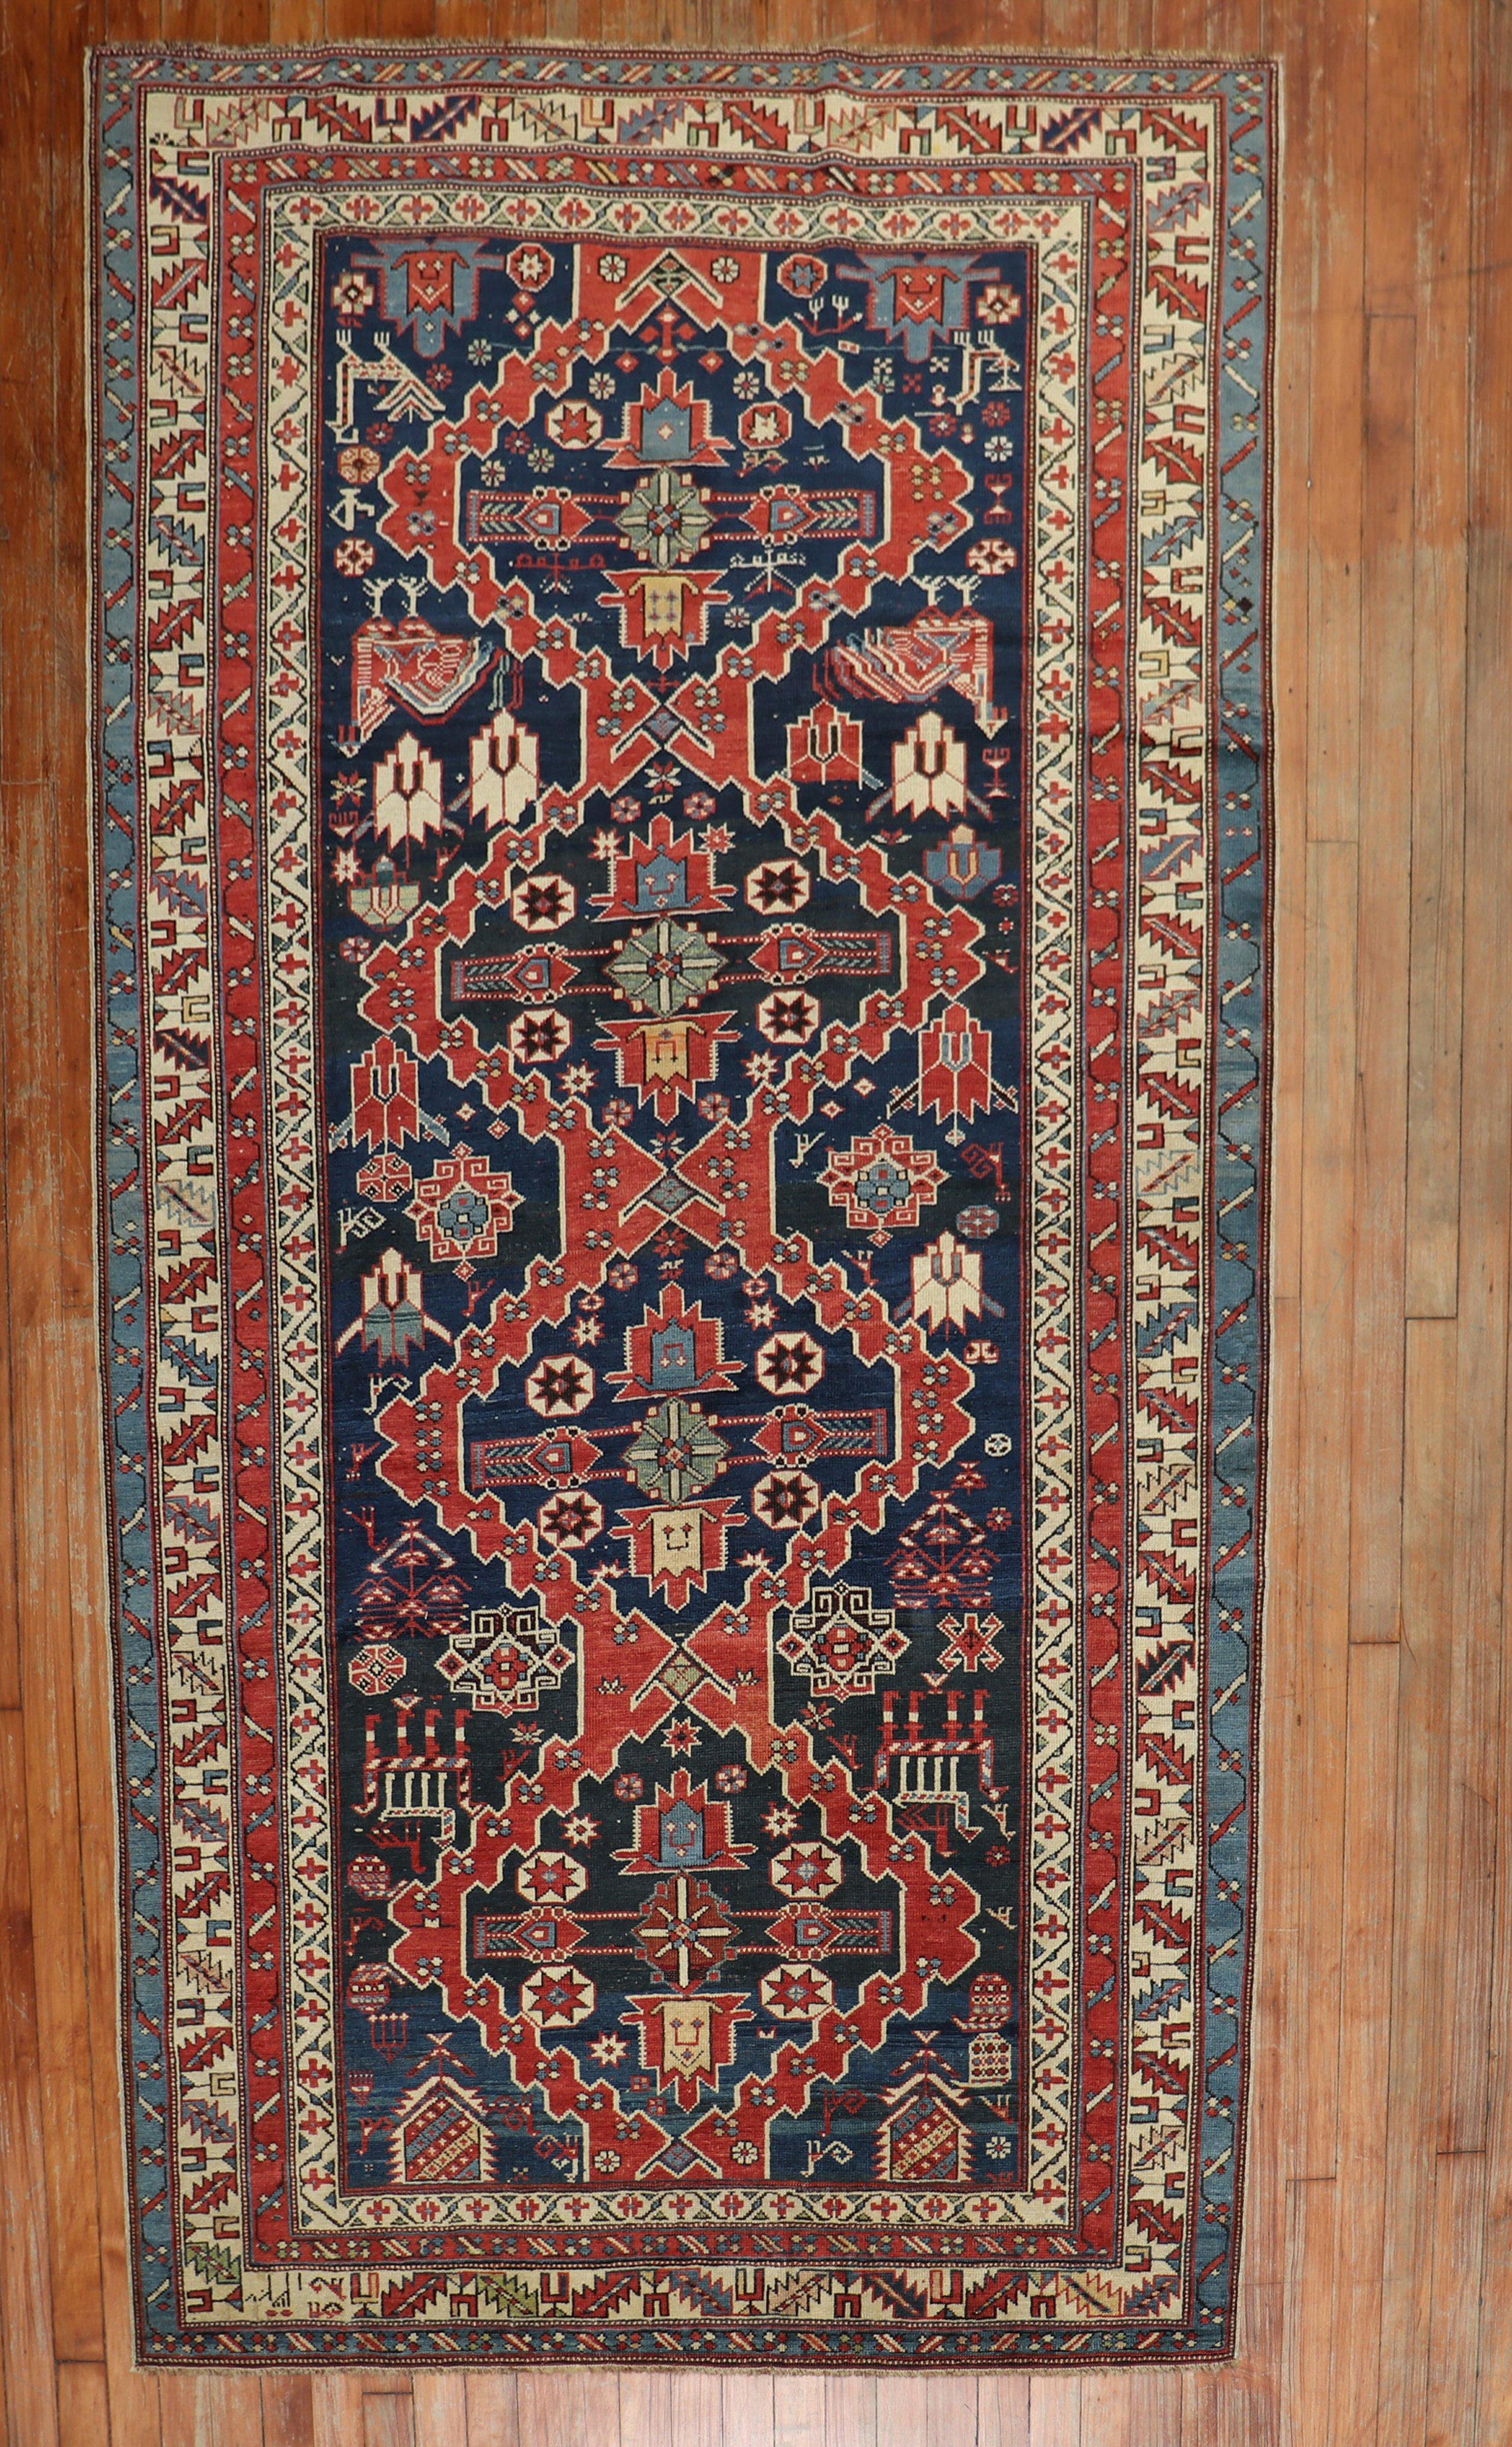 Dated 1909 Geometric Tribal Caucasian Shirvan rug

Measures: 4'2” x 7'3”

Antique Caucasian rugs from the Shirvan district village are still considered one of the best decorative and collector type of rugs from that the Caucasian